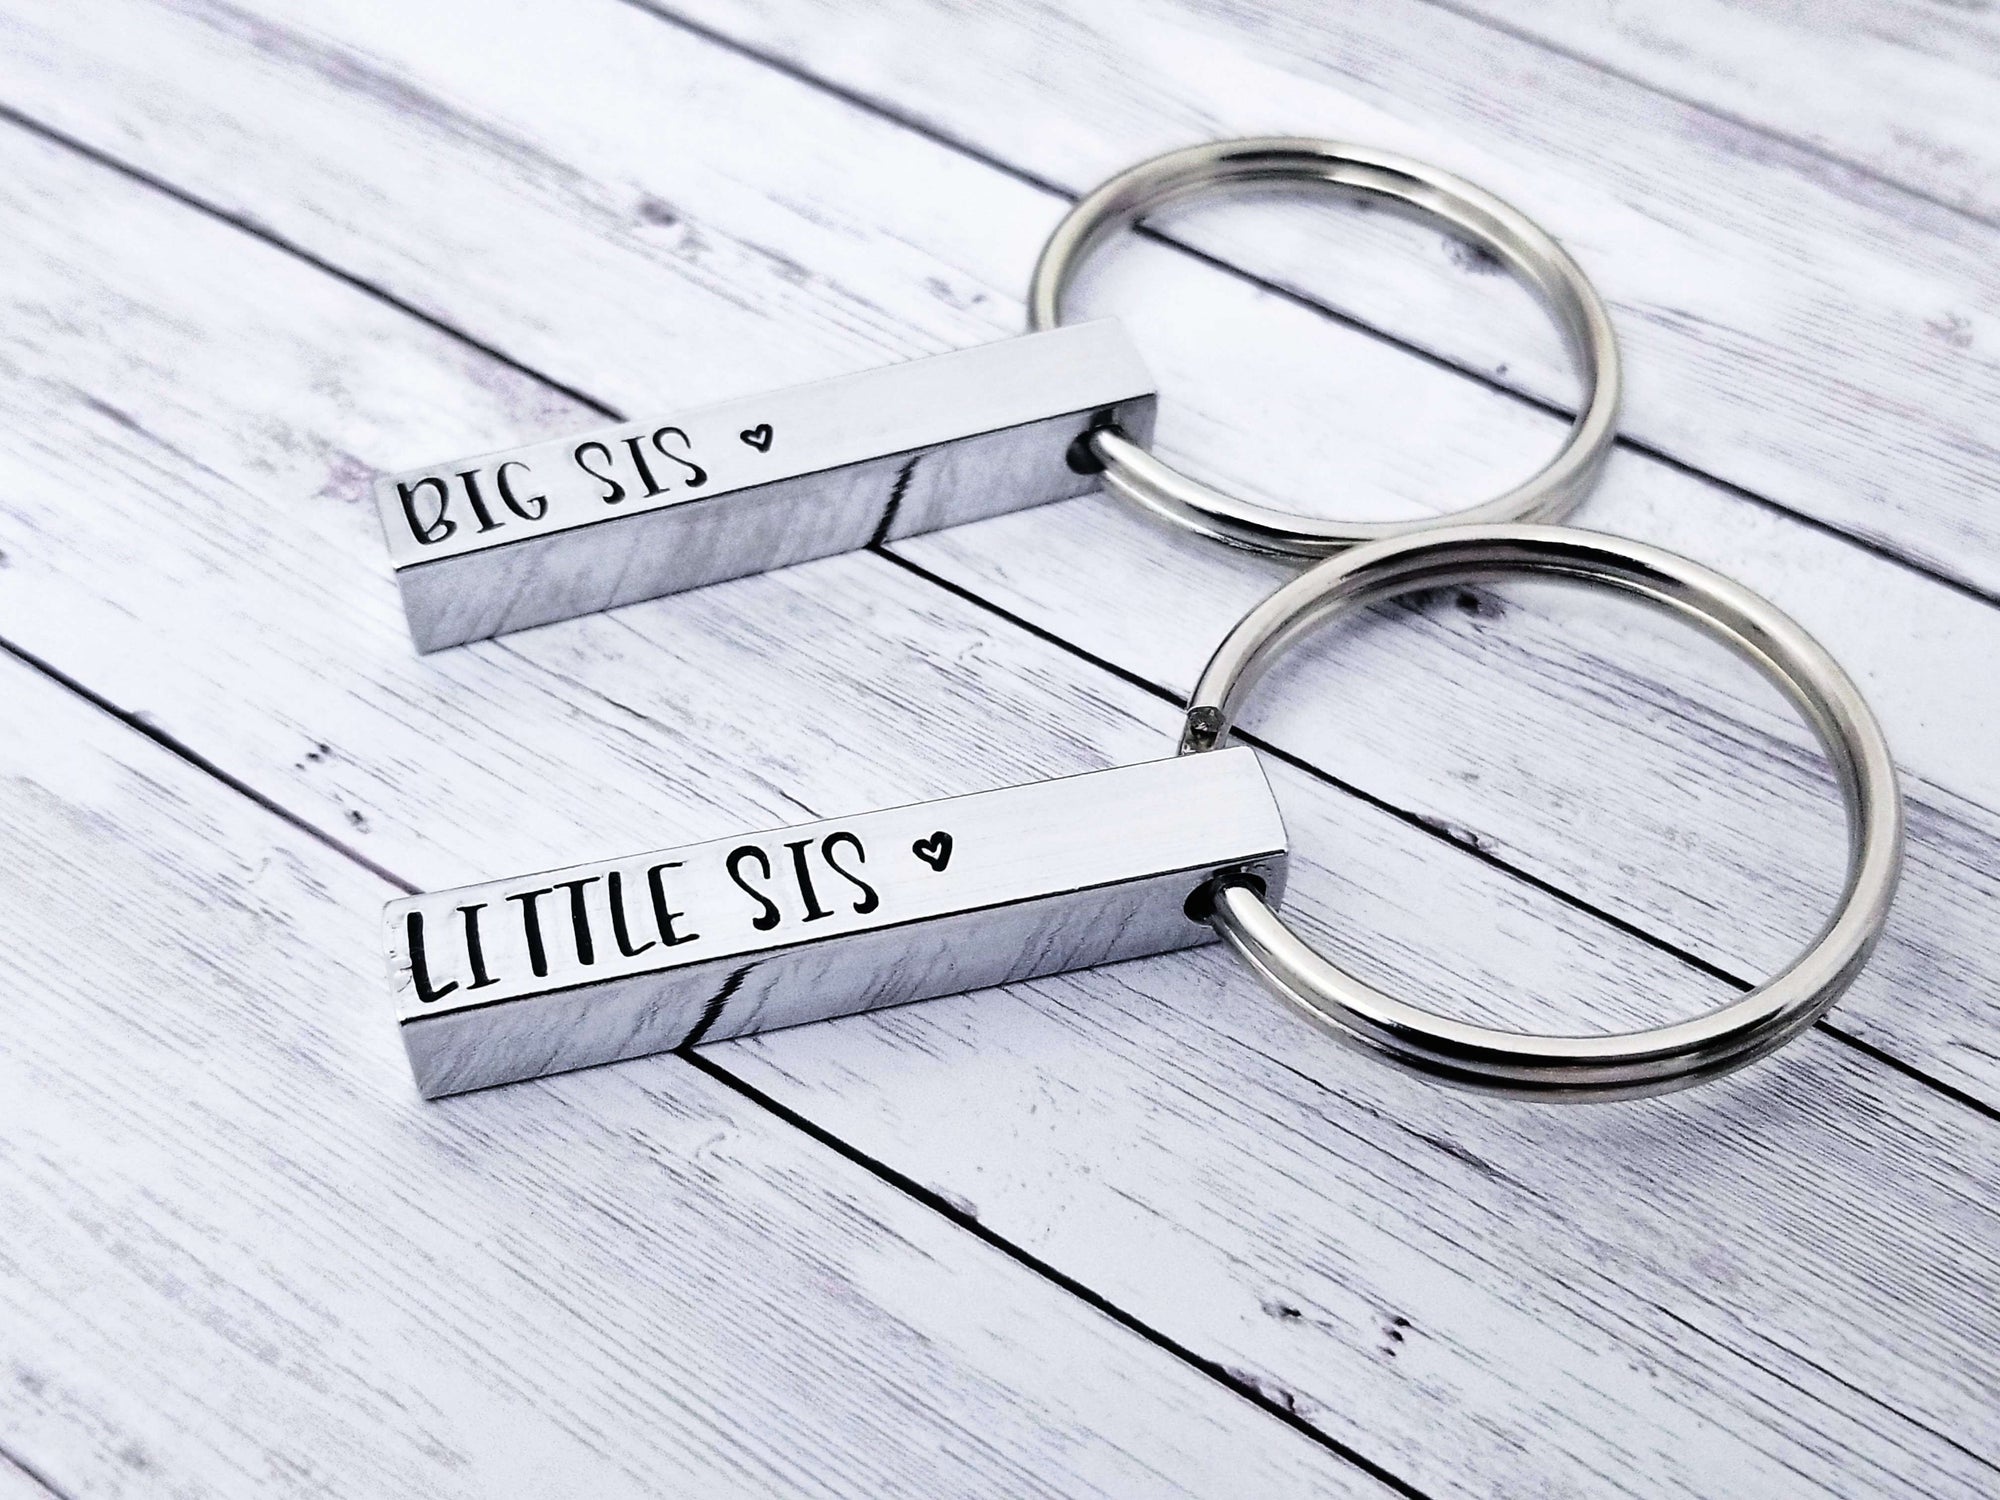 Sisters keychain, Bestie Gift, Matching gifts, #Friend, Gift for Friend, Friendship Gift, Friend Gift, Keychain Gift